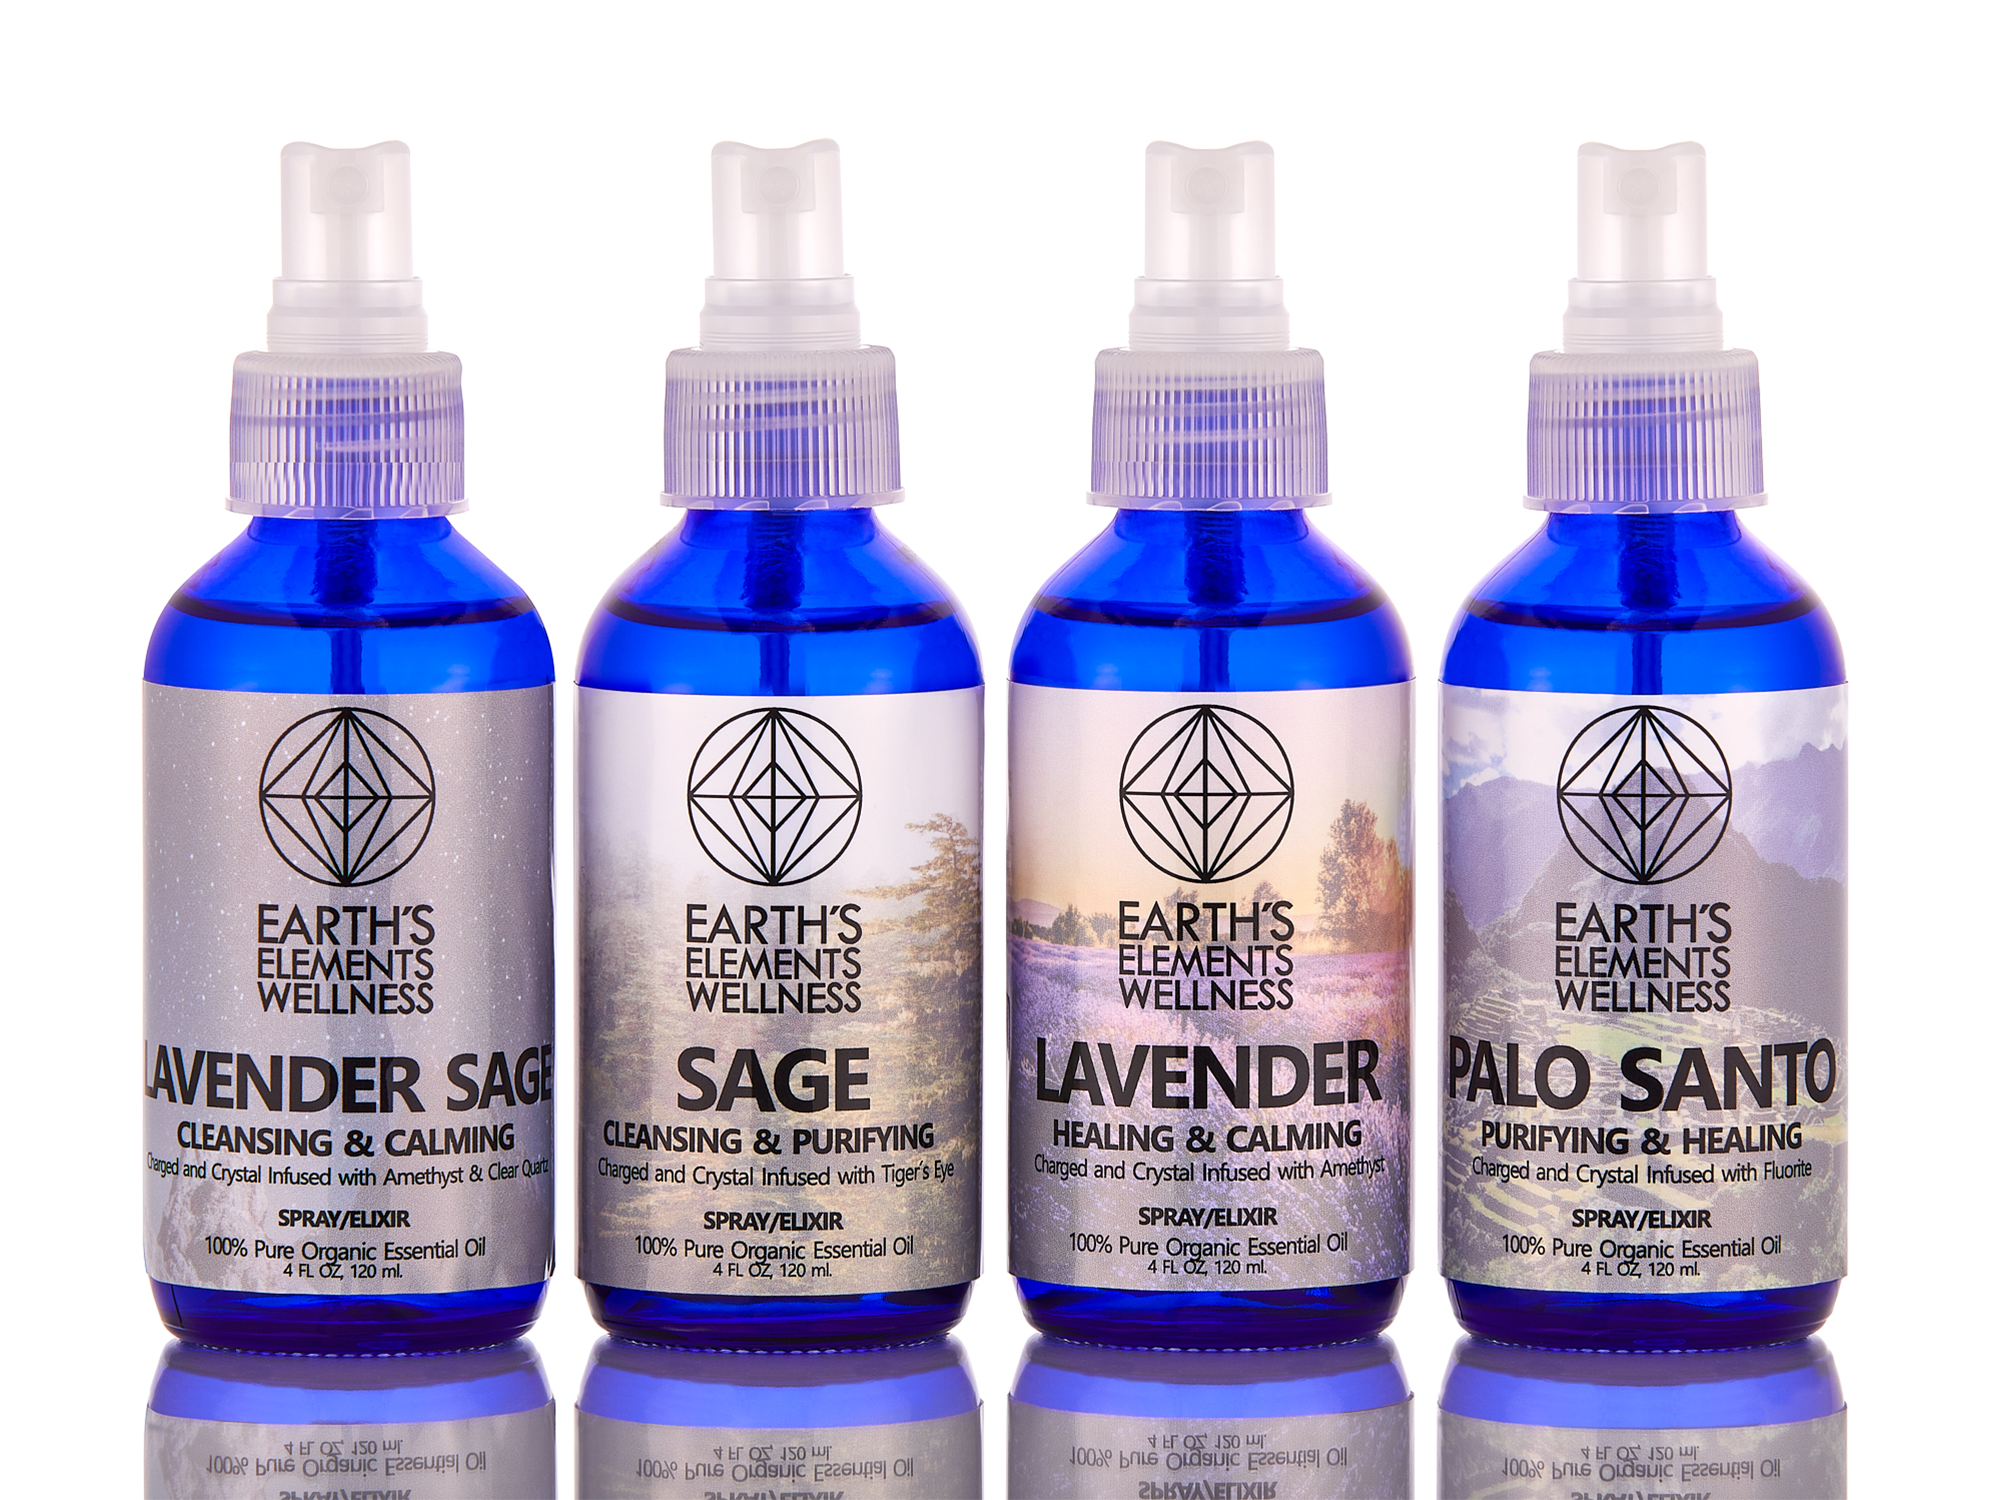 Have you Tried Our Amazing Crystal Infused Sprays/Elixirs?